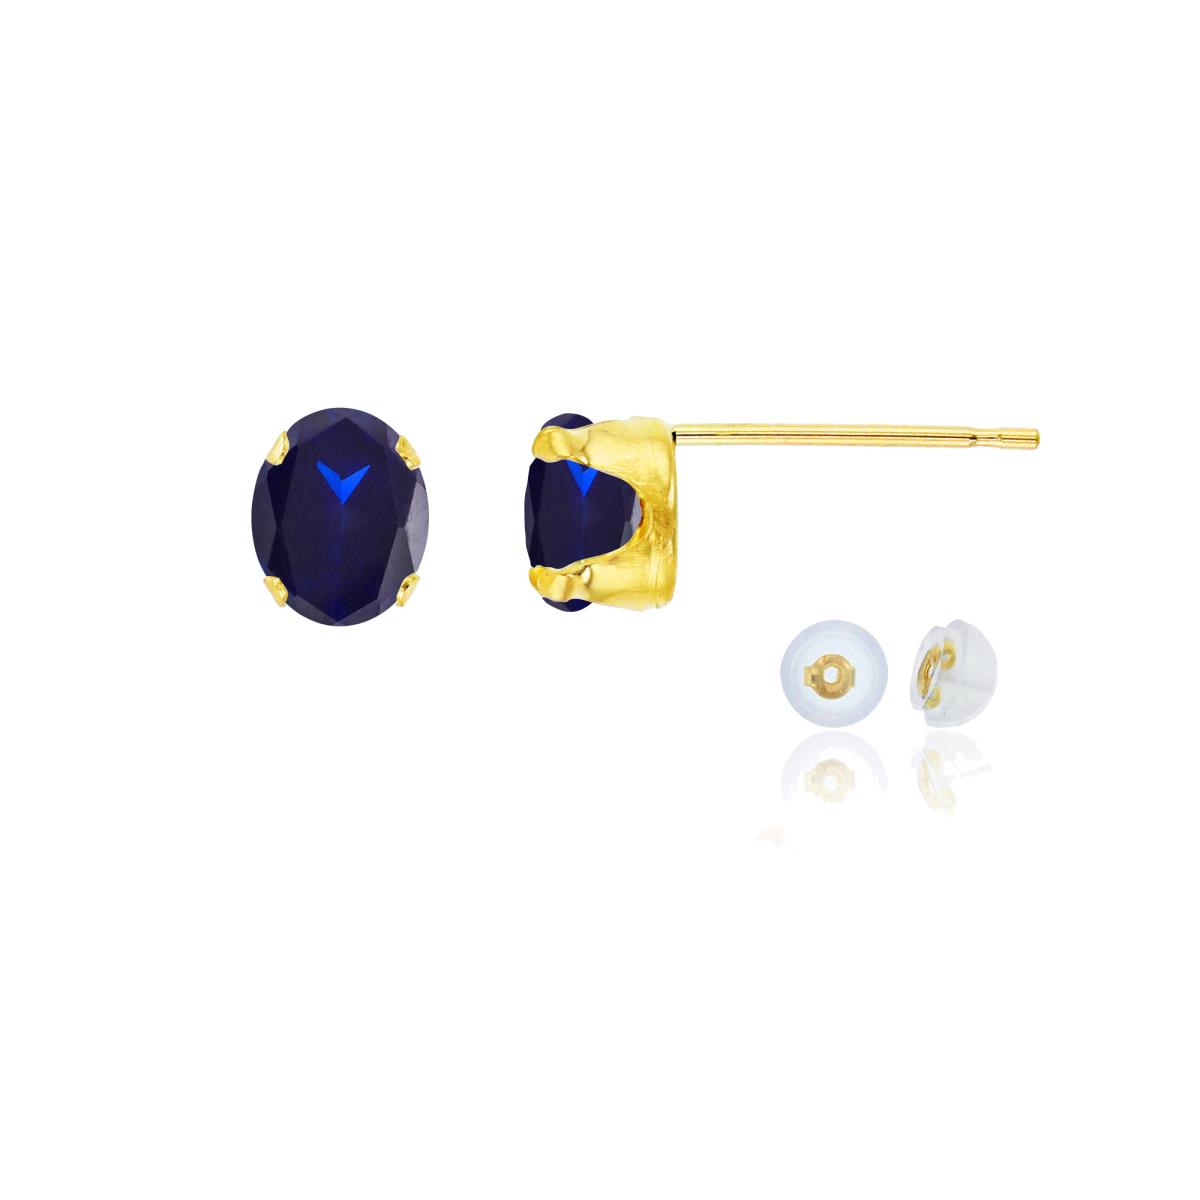 14K Yellow Gold 6x4mm Oval Cr Blue Sapphire Stud Earring with Silicone Back